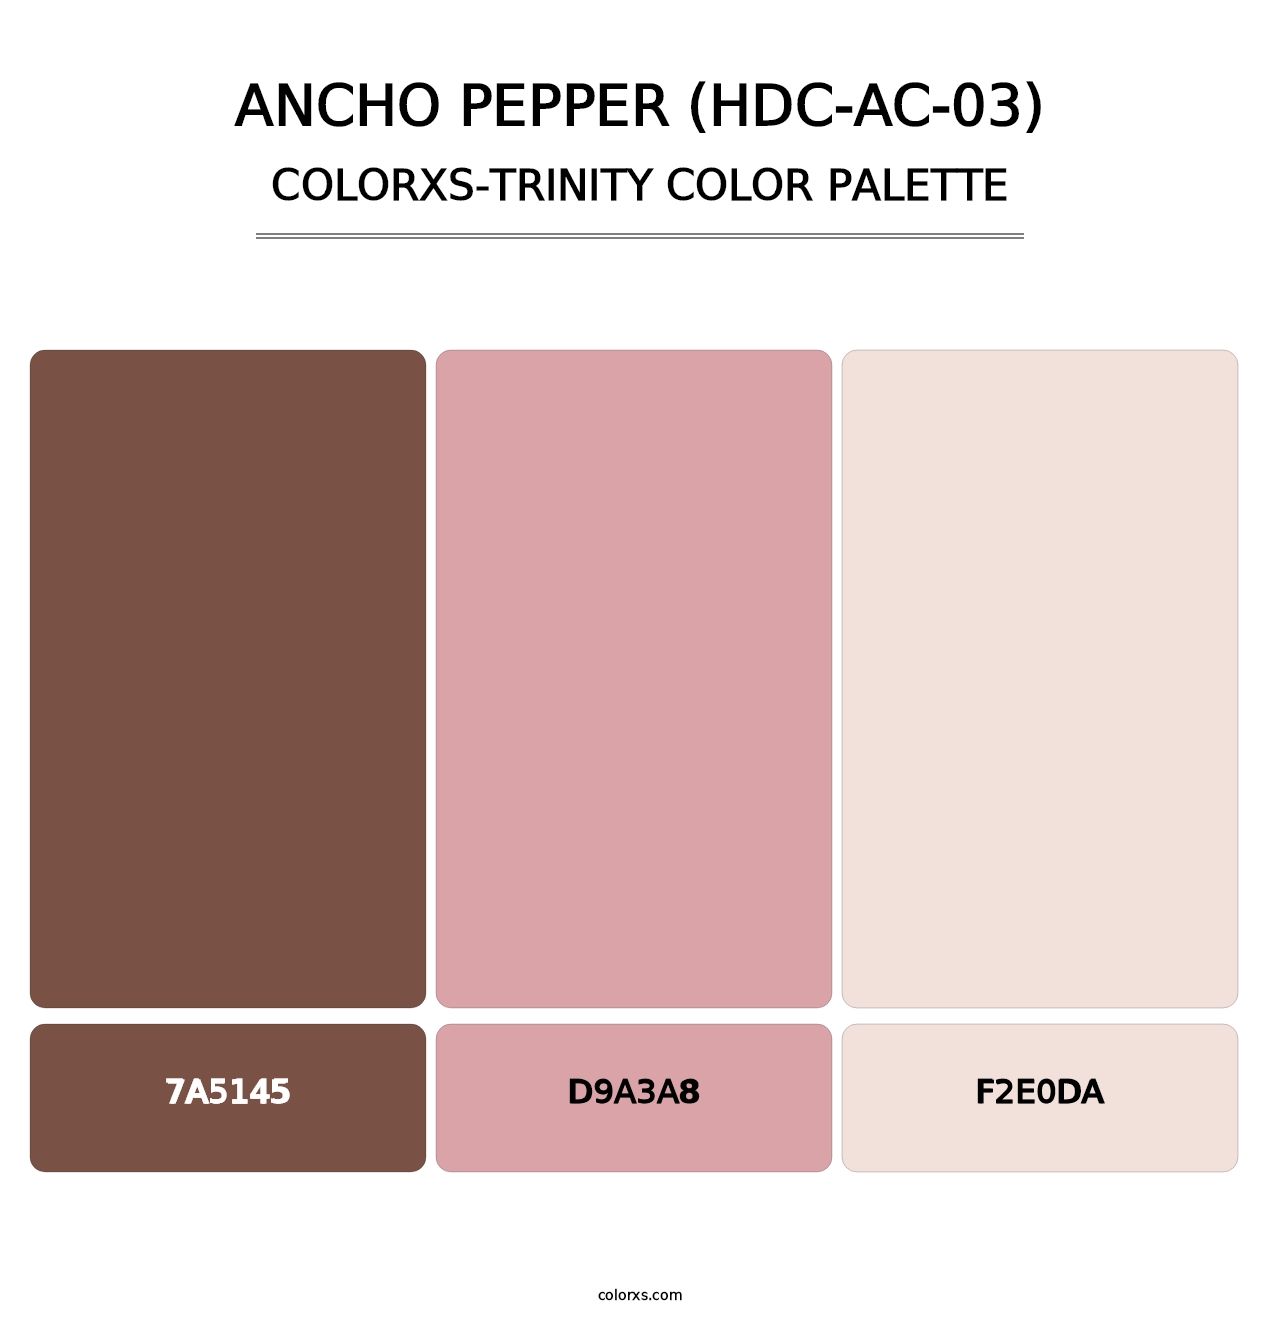 Ancho Pepper (HDC-AC-03) - Colorxs Trinity Palette